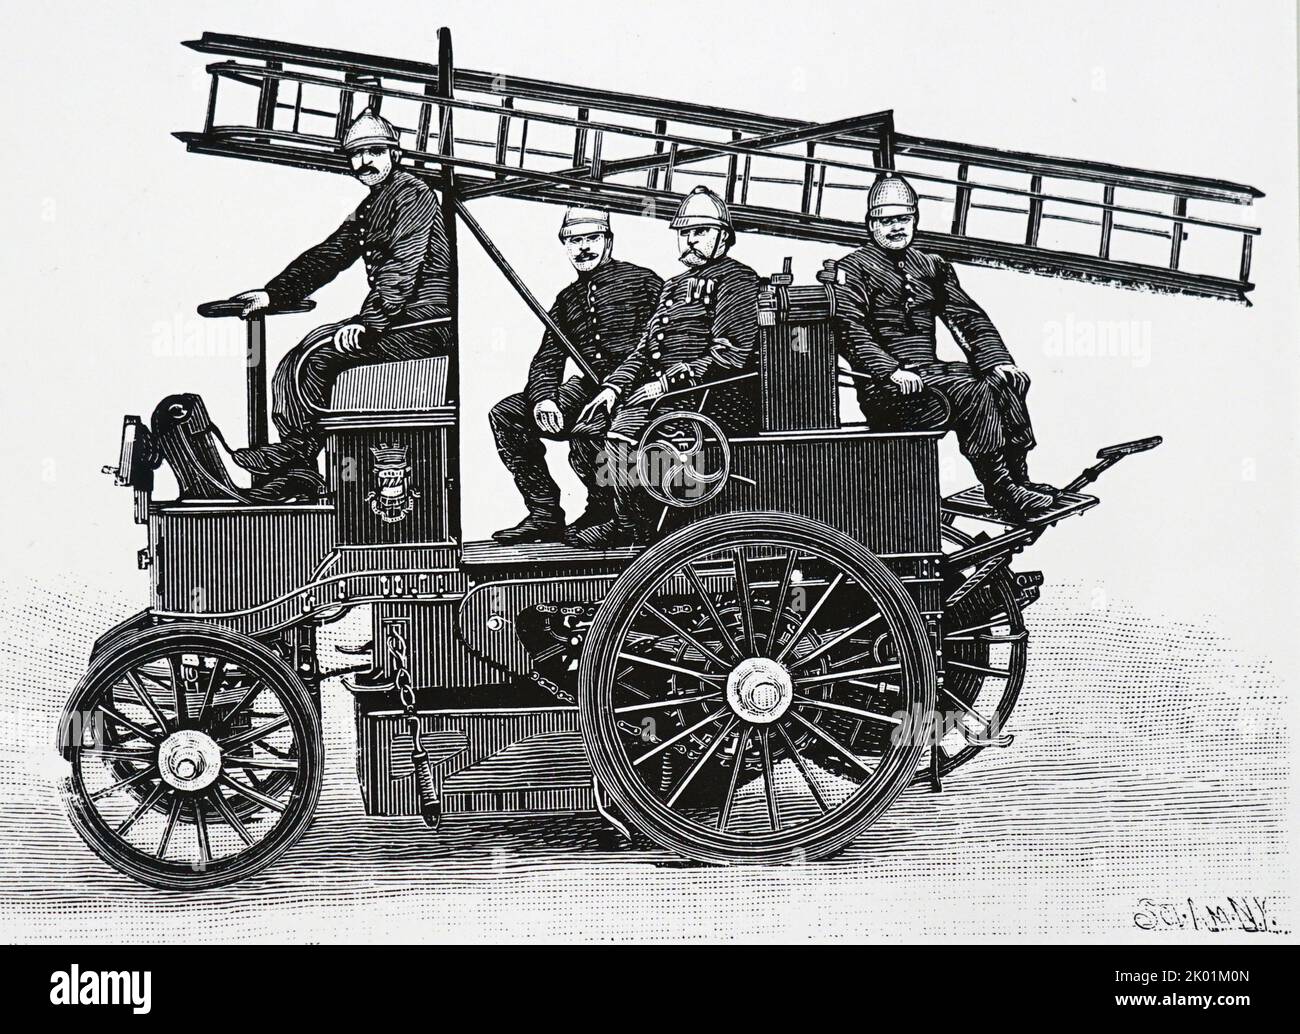 Electrically powered hose wagon used by the Paris Fire Service. Stock Photo